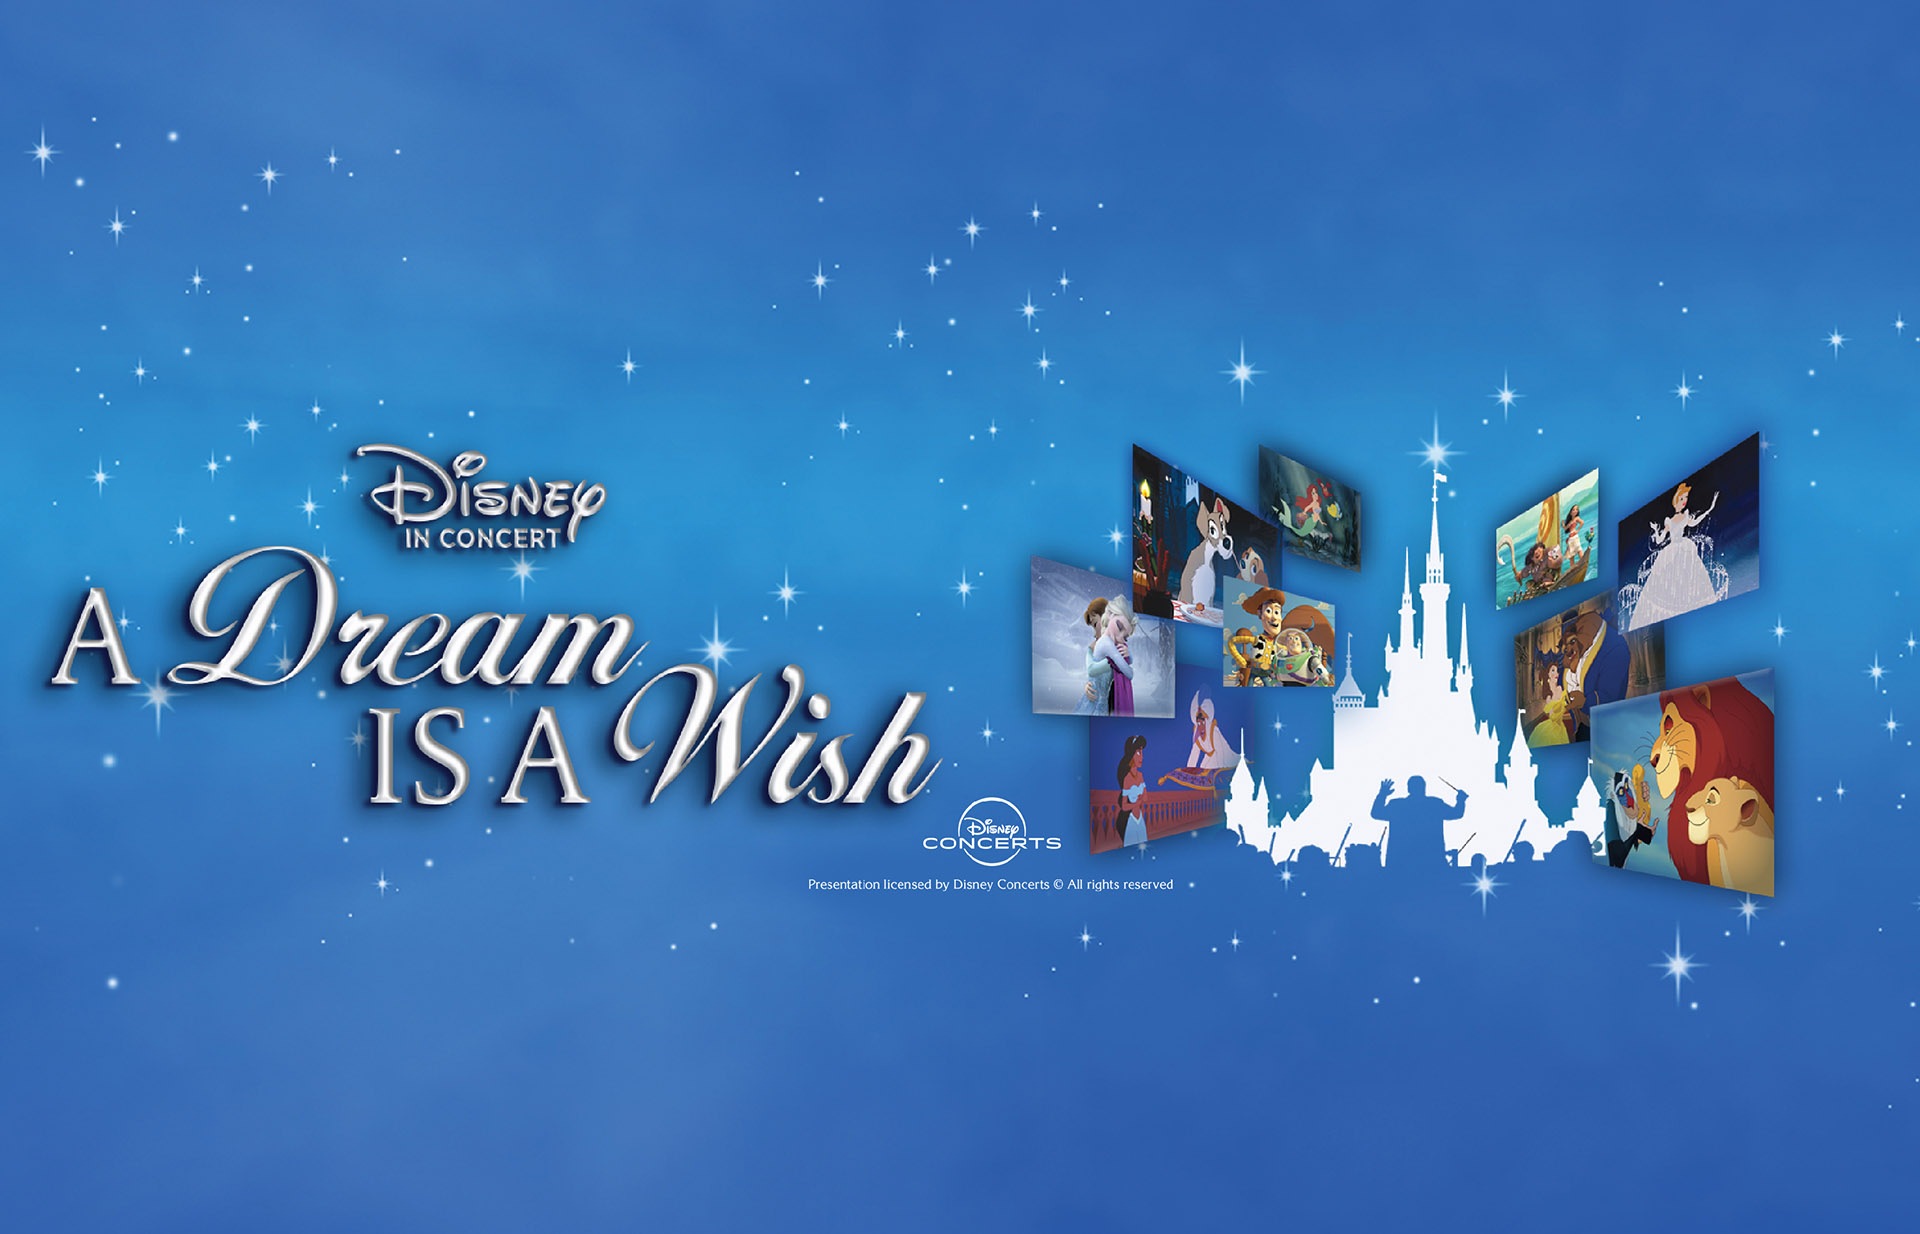 DISNEY IN CONCERT A Dream Is A Wish